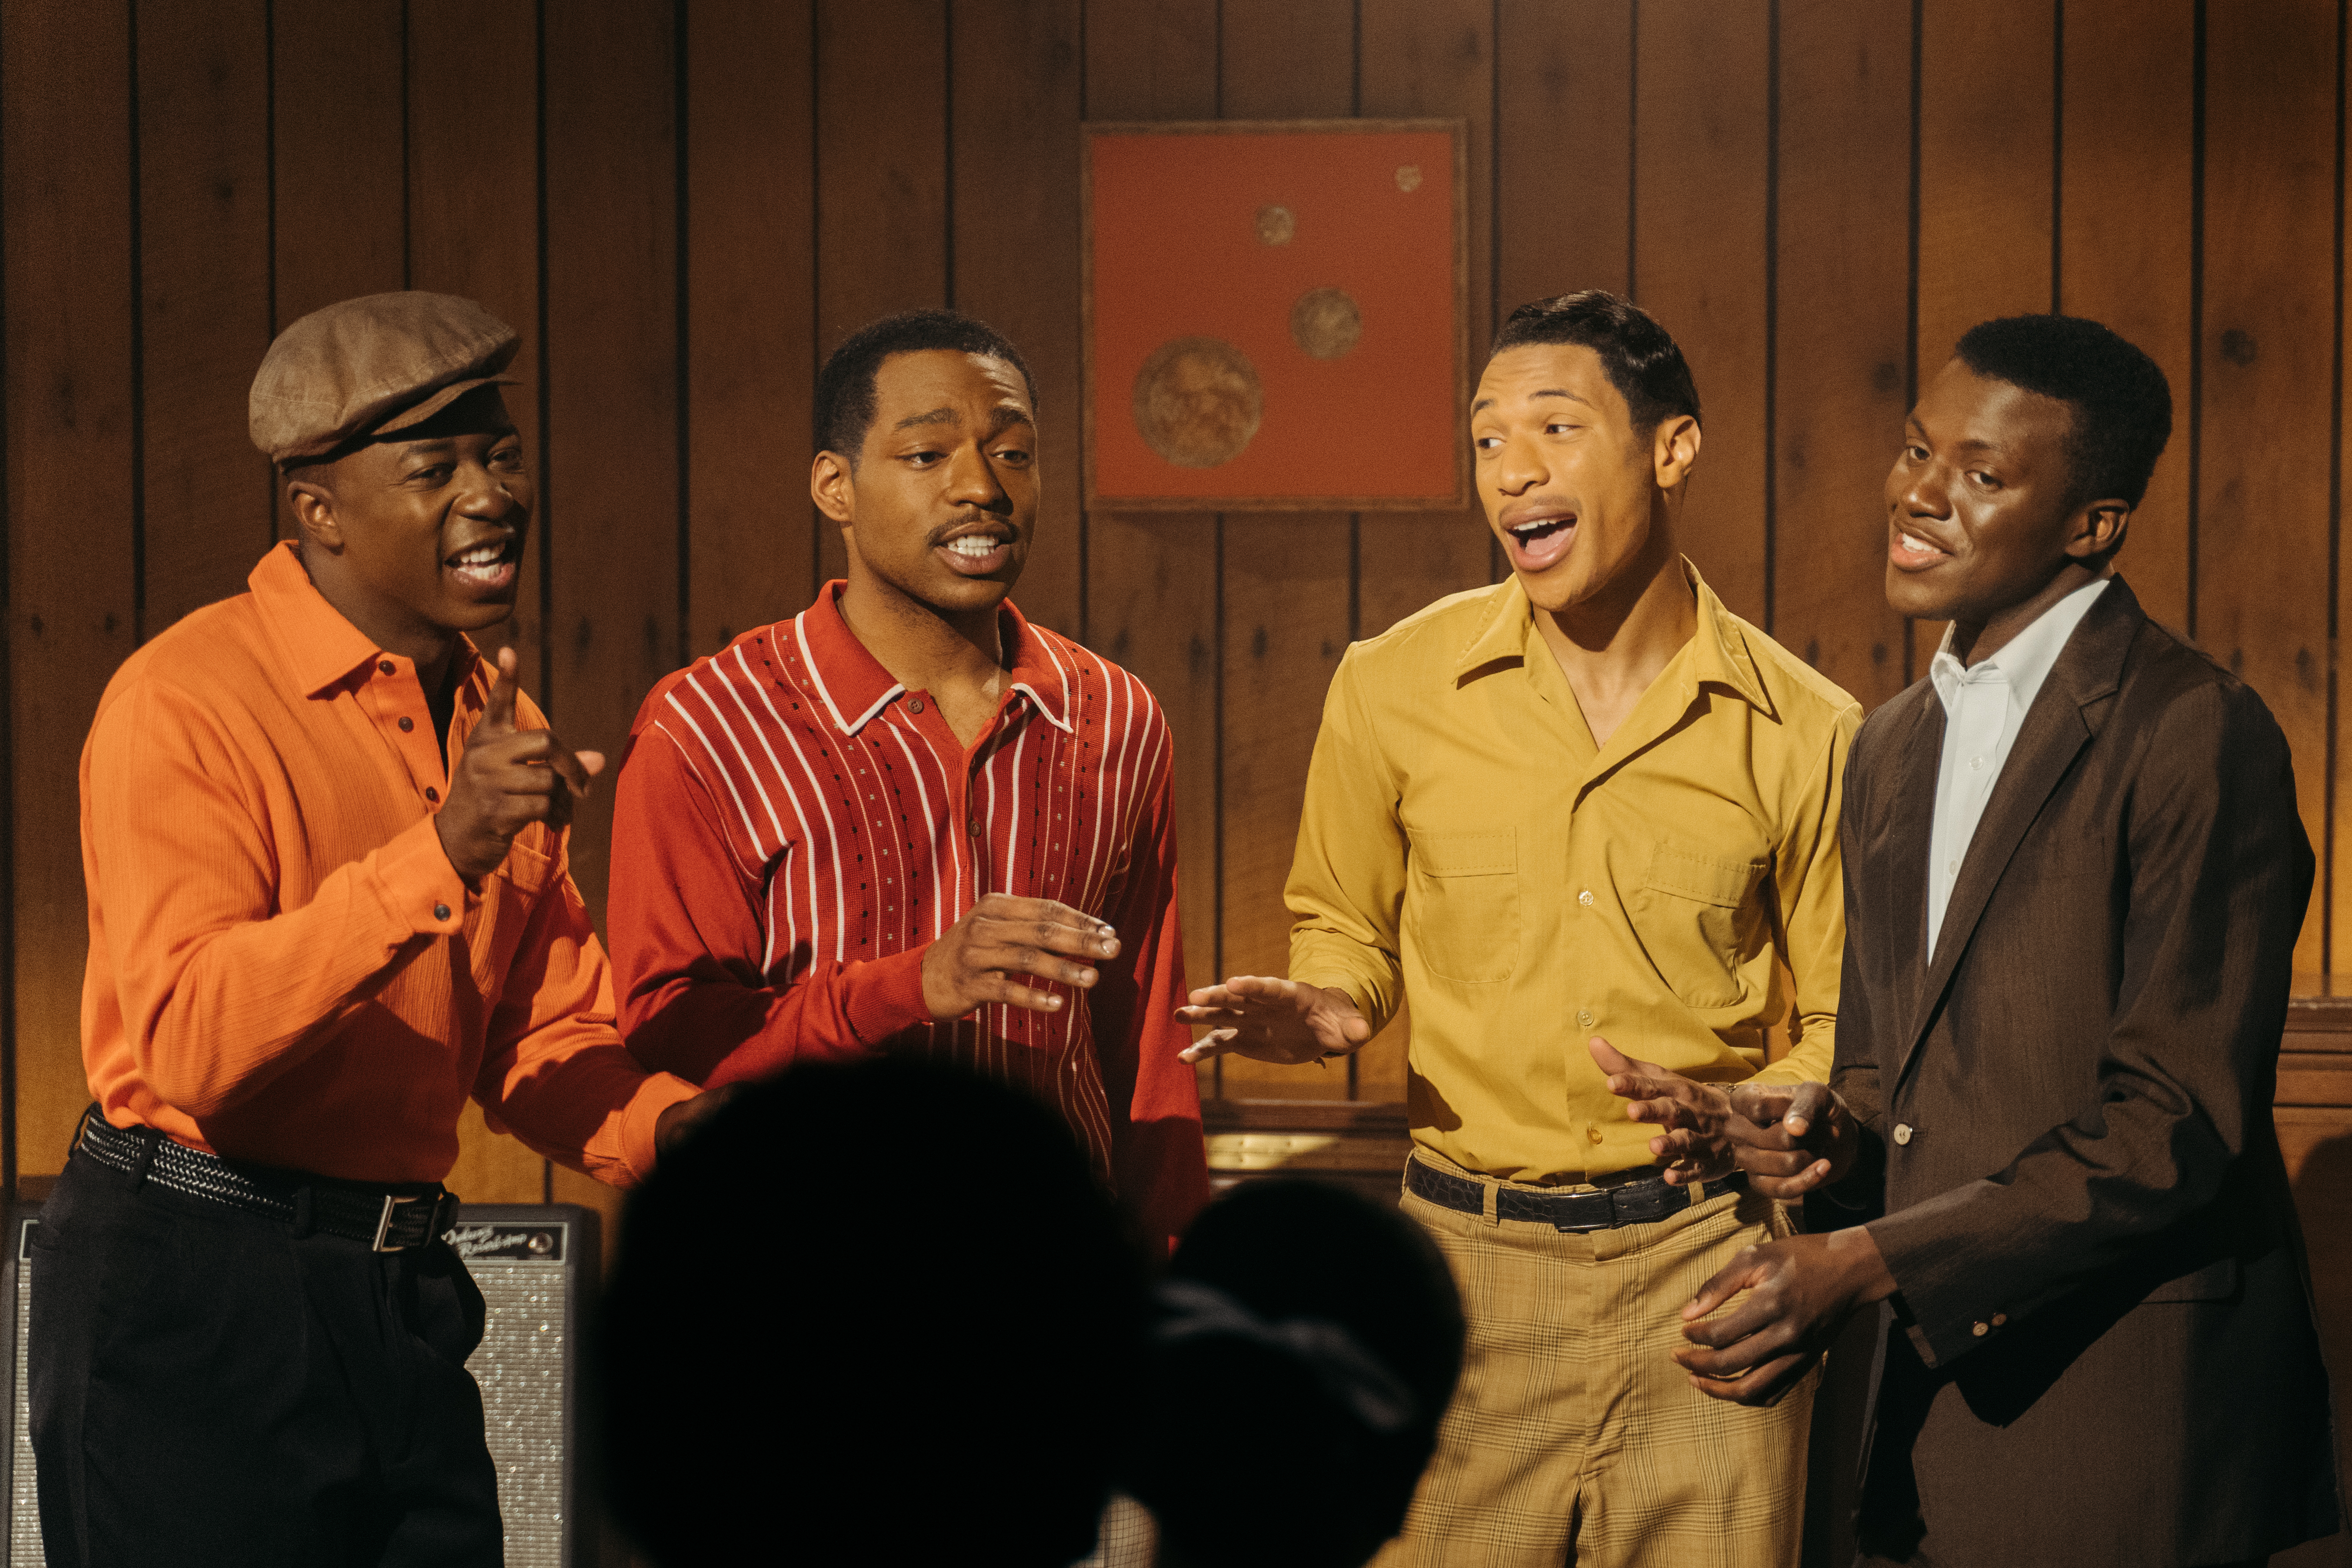 A doo-wop group of four Black men performs in a wood-paneled room. From Julian Turner's 'The Big Three.' Courtesy of BlackStar Film Festival.